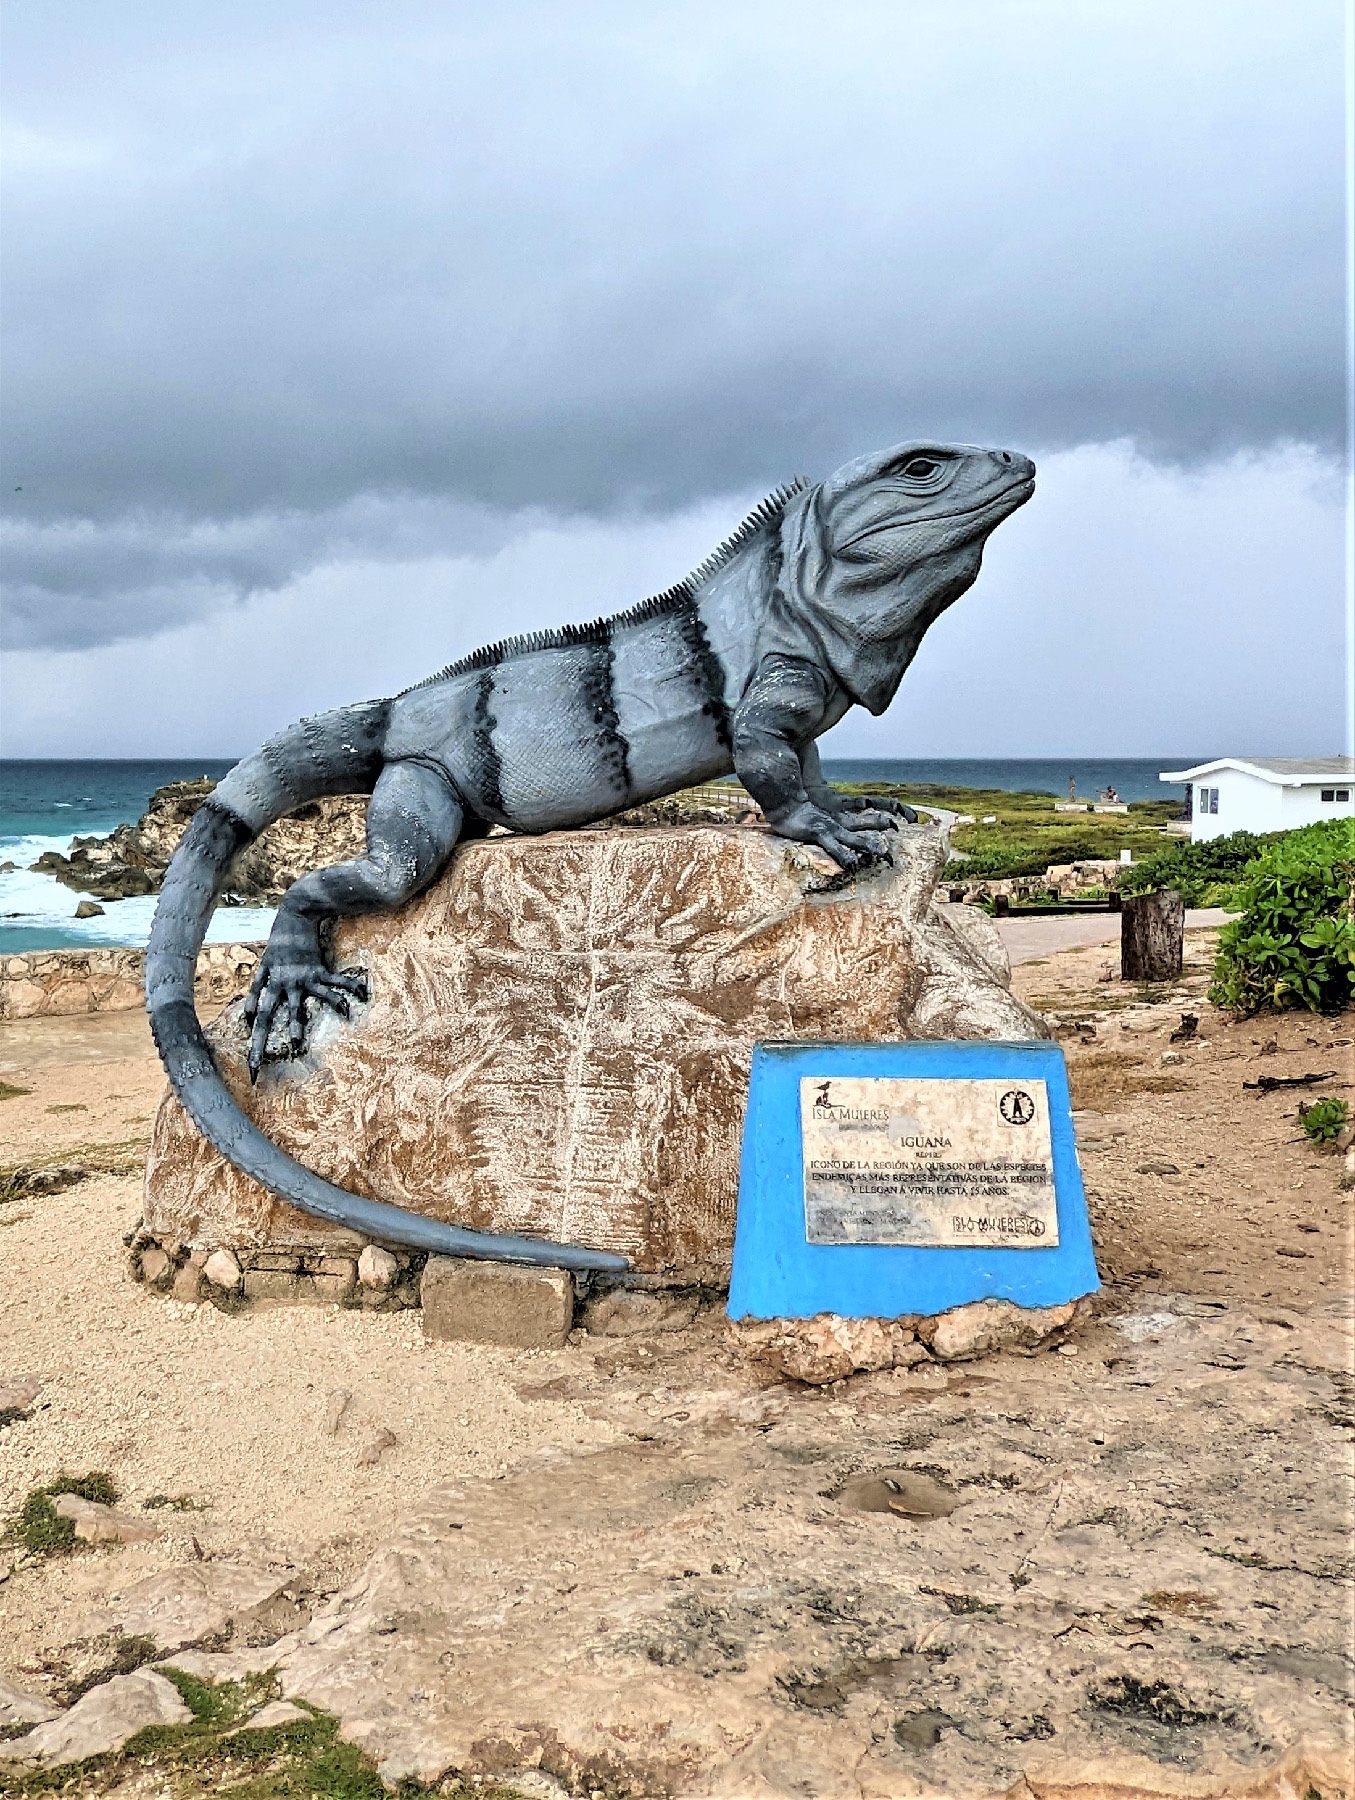 A monument on Mexico’s Isla Mujeres pays tribute to the indigenous iguana that thrives and roams freely here and throughout Central America.